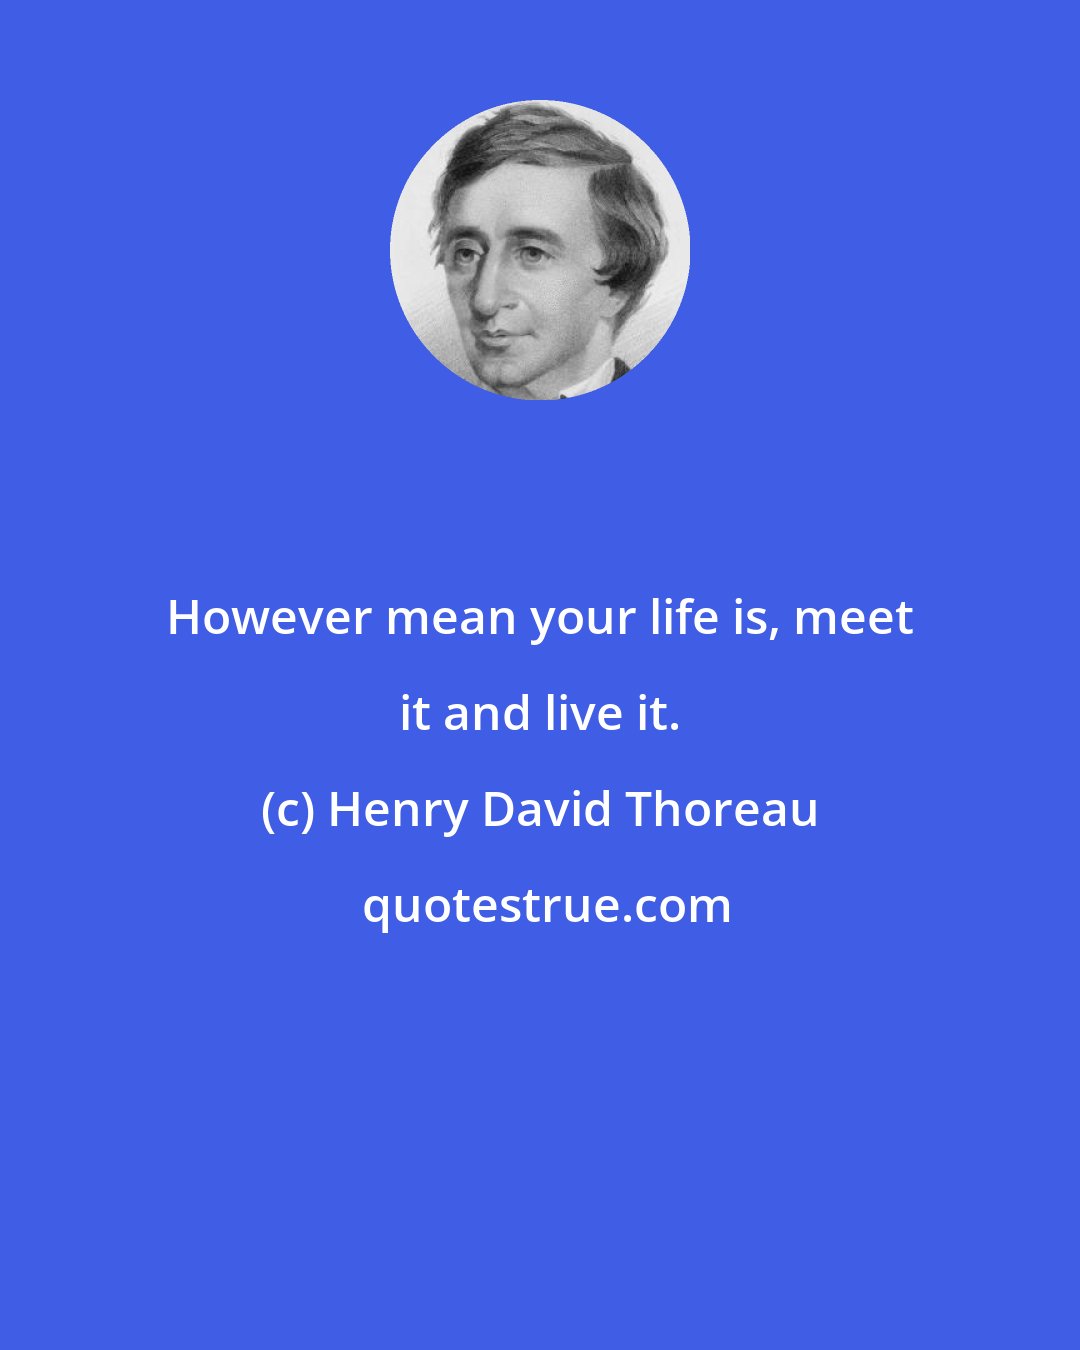 Henry David Thoreau: However mean your life is, meet it and live it.